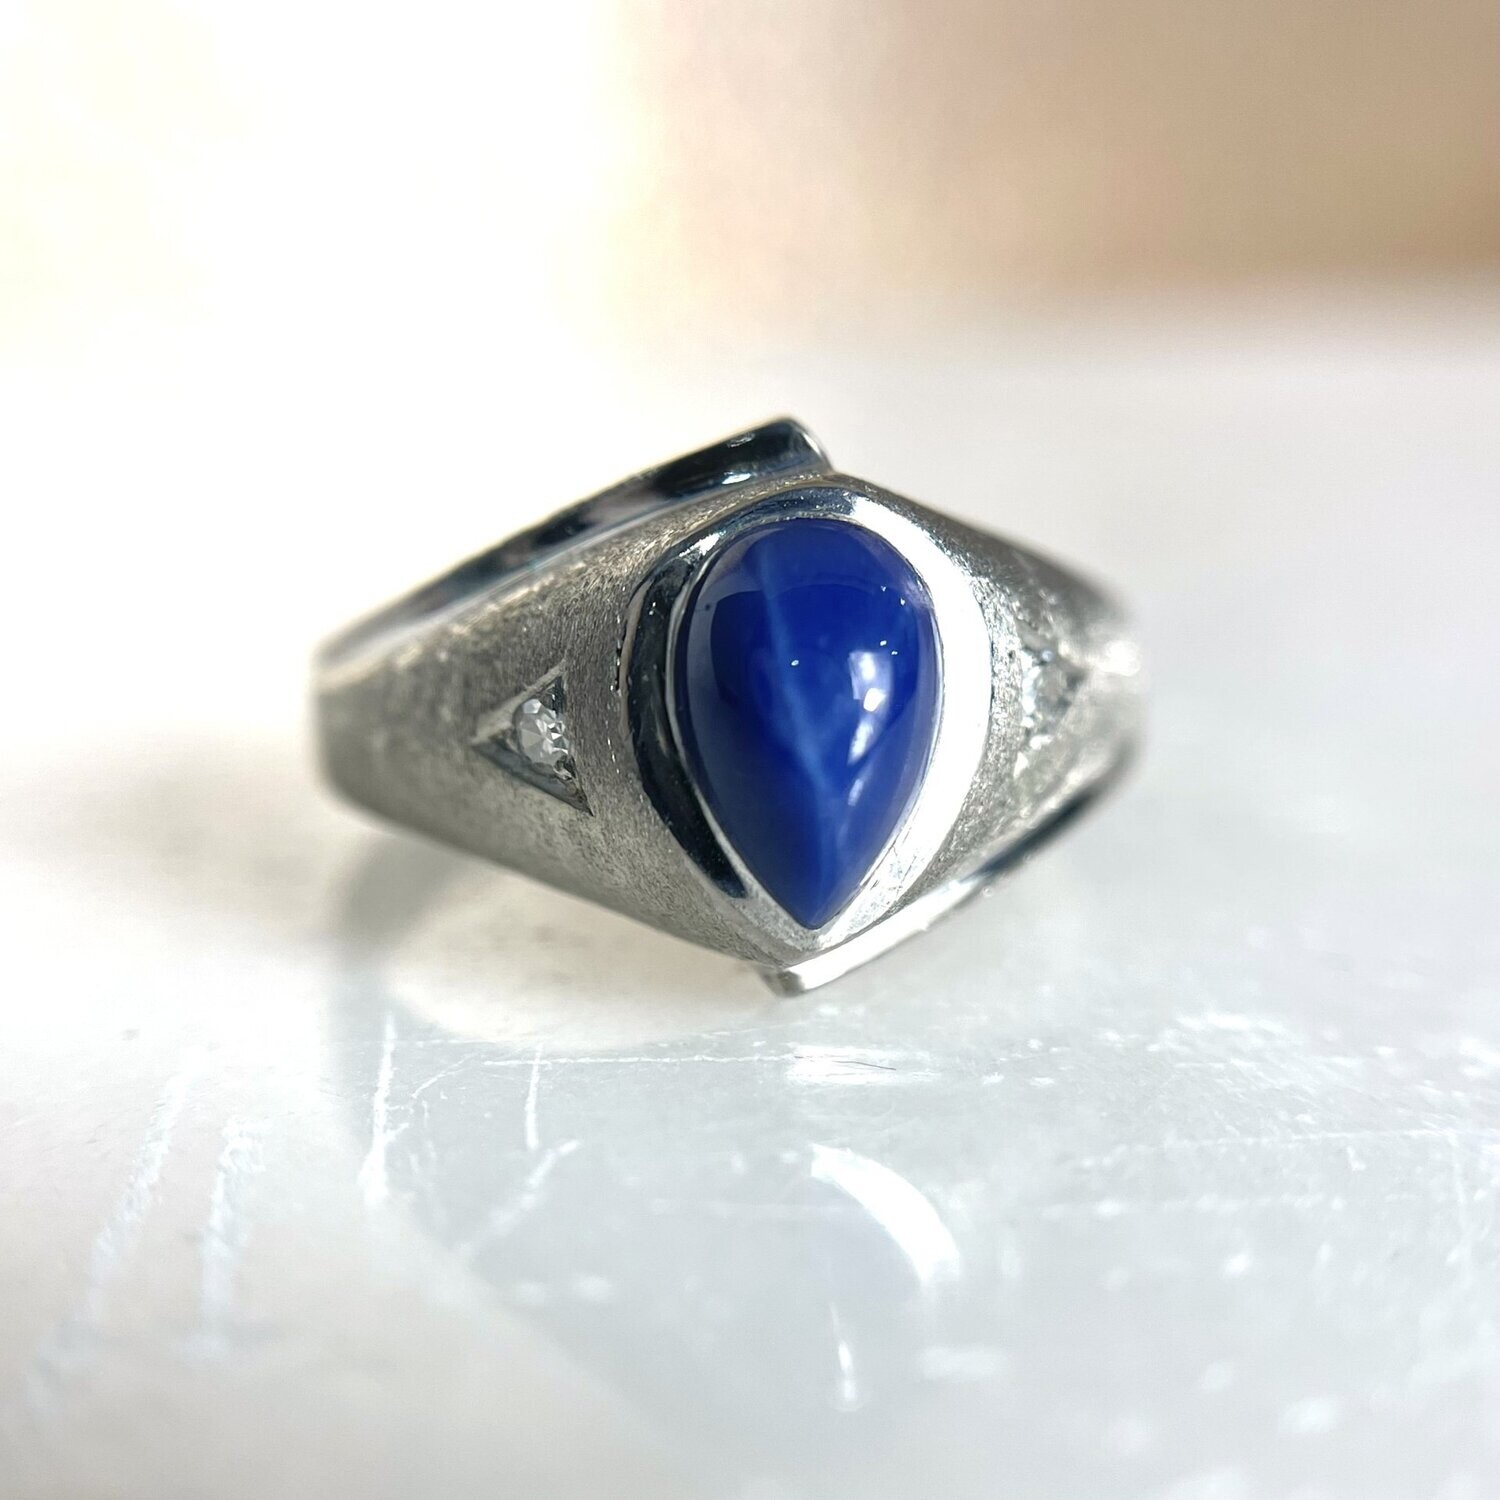 Buy Vintage Style Silver Ring, Lab Blue Star Sapphire Ring, Solid 925  Sterling Silver, Blue Star Sapphire Ring, Stackable Ring, Gift for All.  Online in India - Etsy